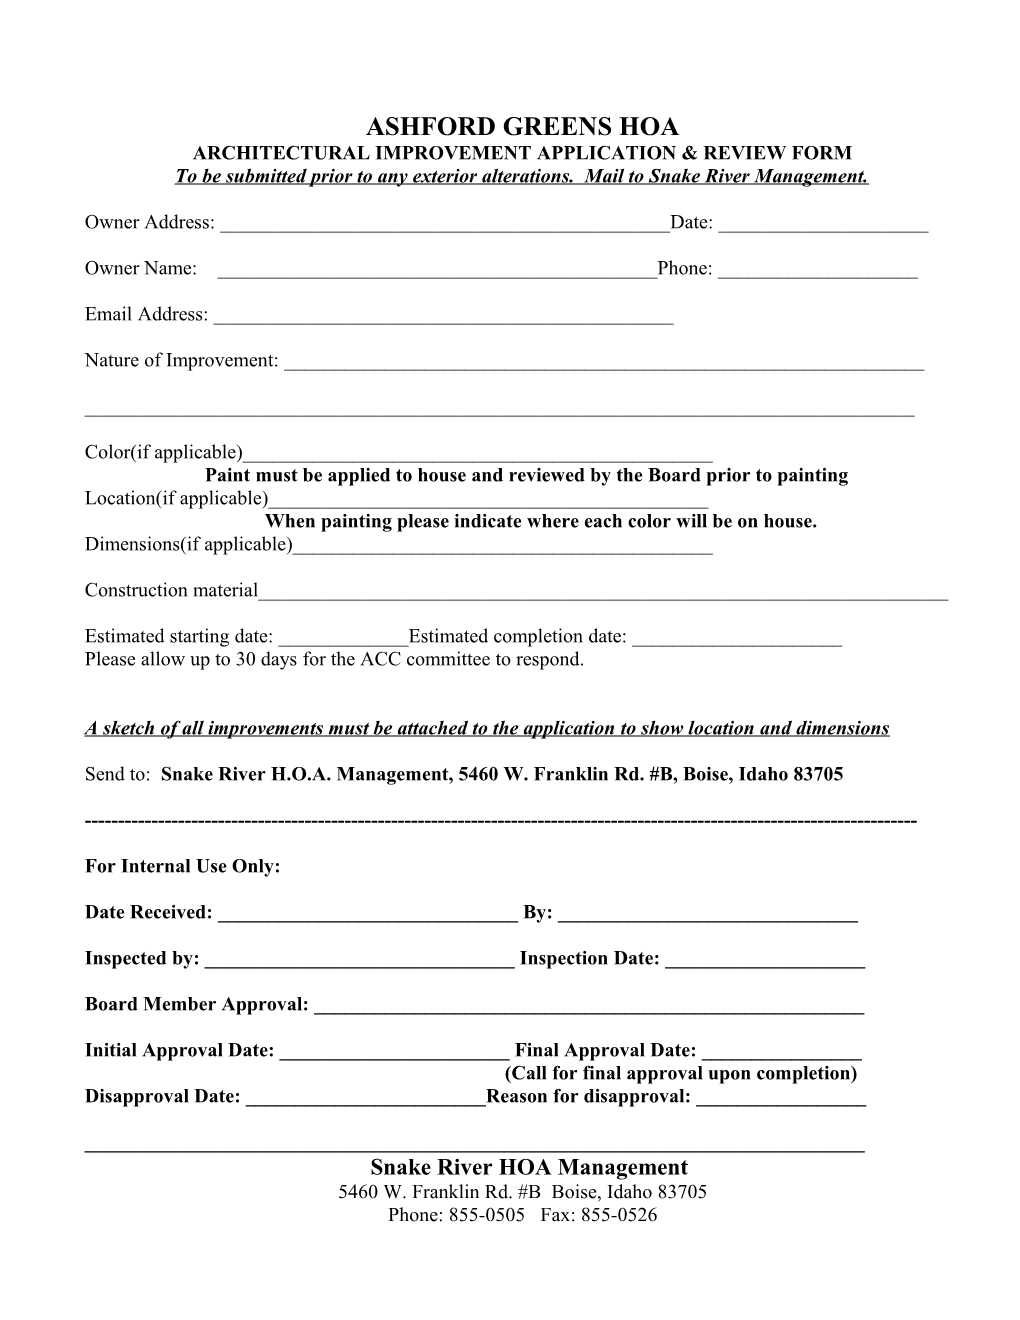 Architectural Improvement Application & Review Form